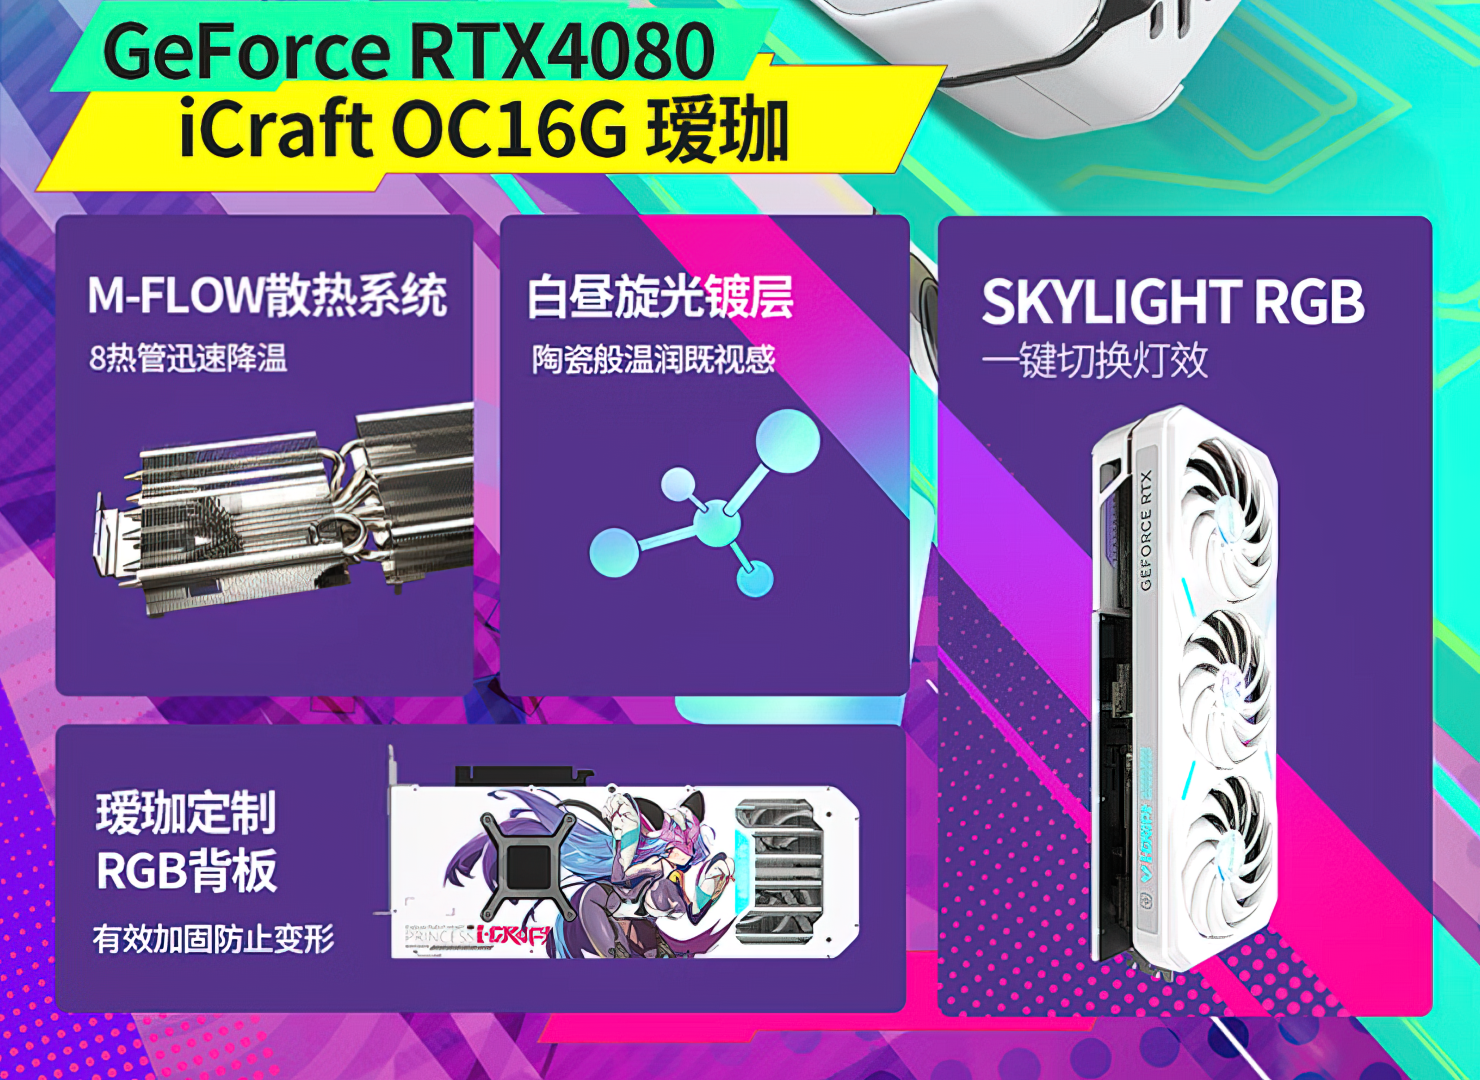 89573_02_maxsuns-anime-themed-geforce-rtx-4080-icraft-costs-more-than-4090_full.png